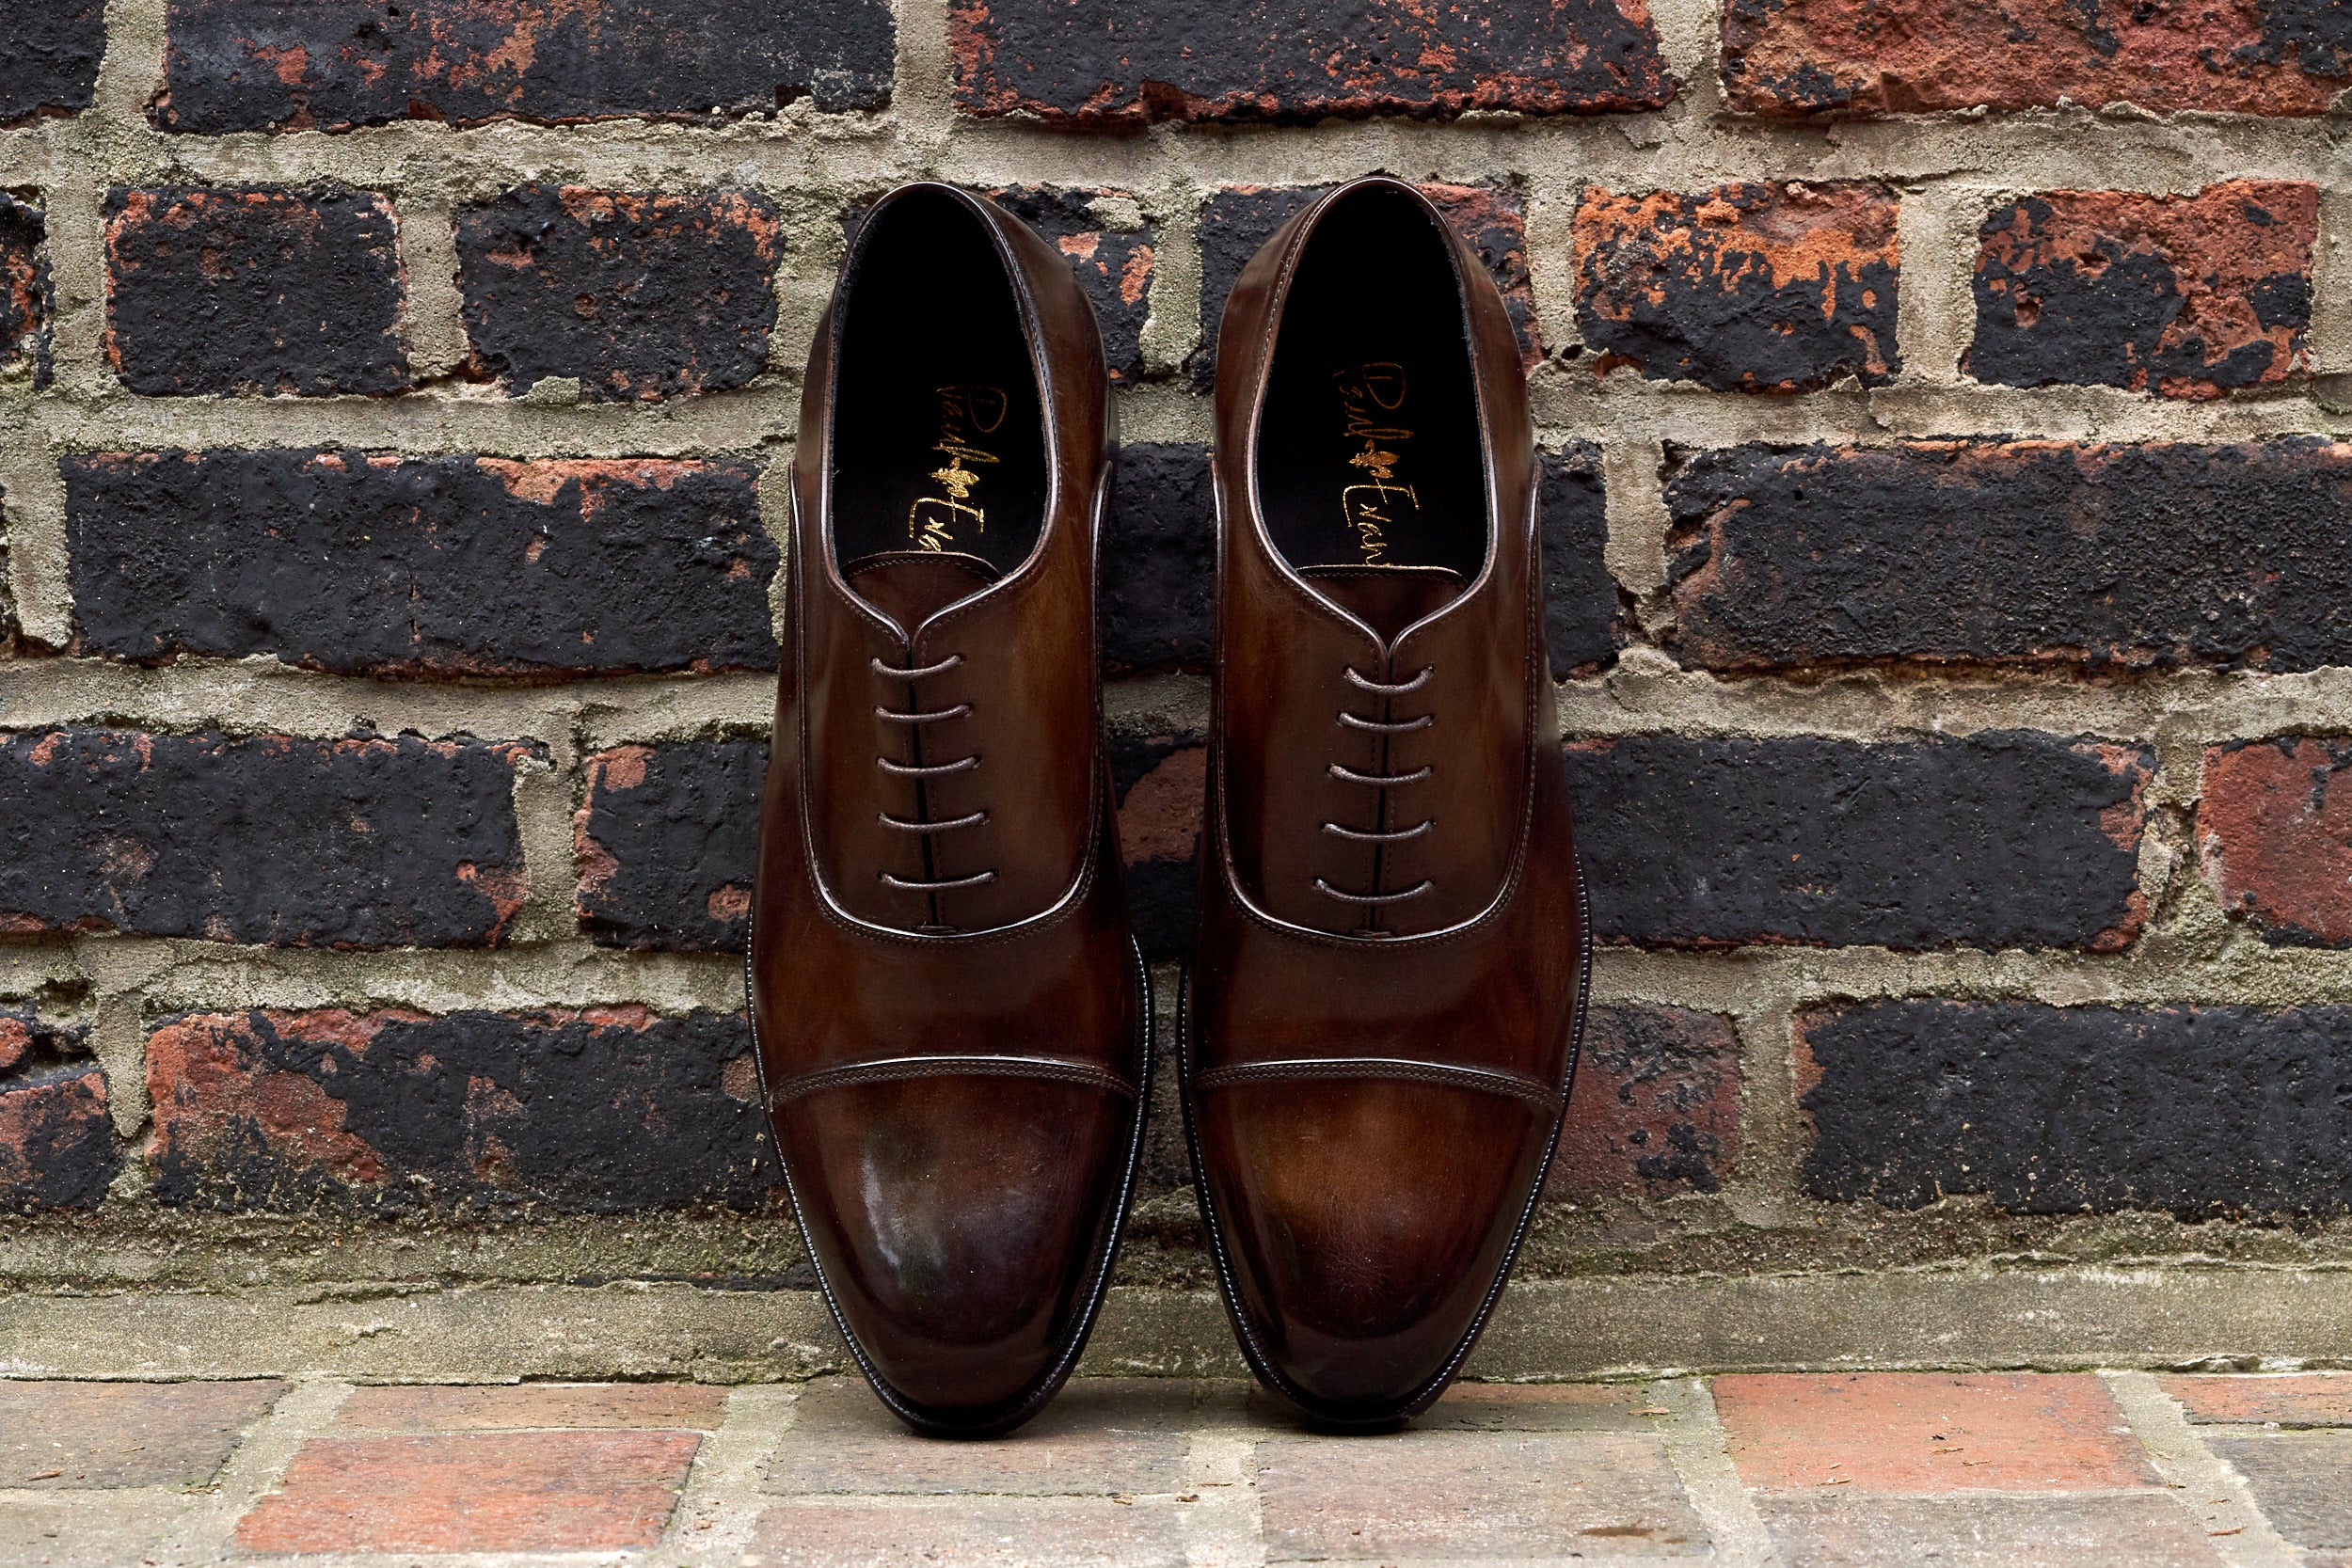 The Cagney II Stitched Cap-Toe Oxford - Chocolate